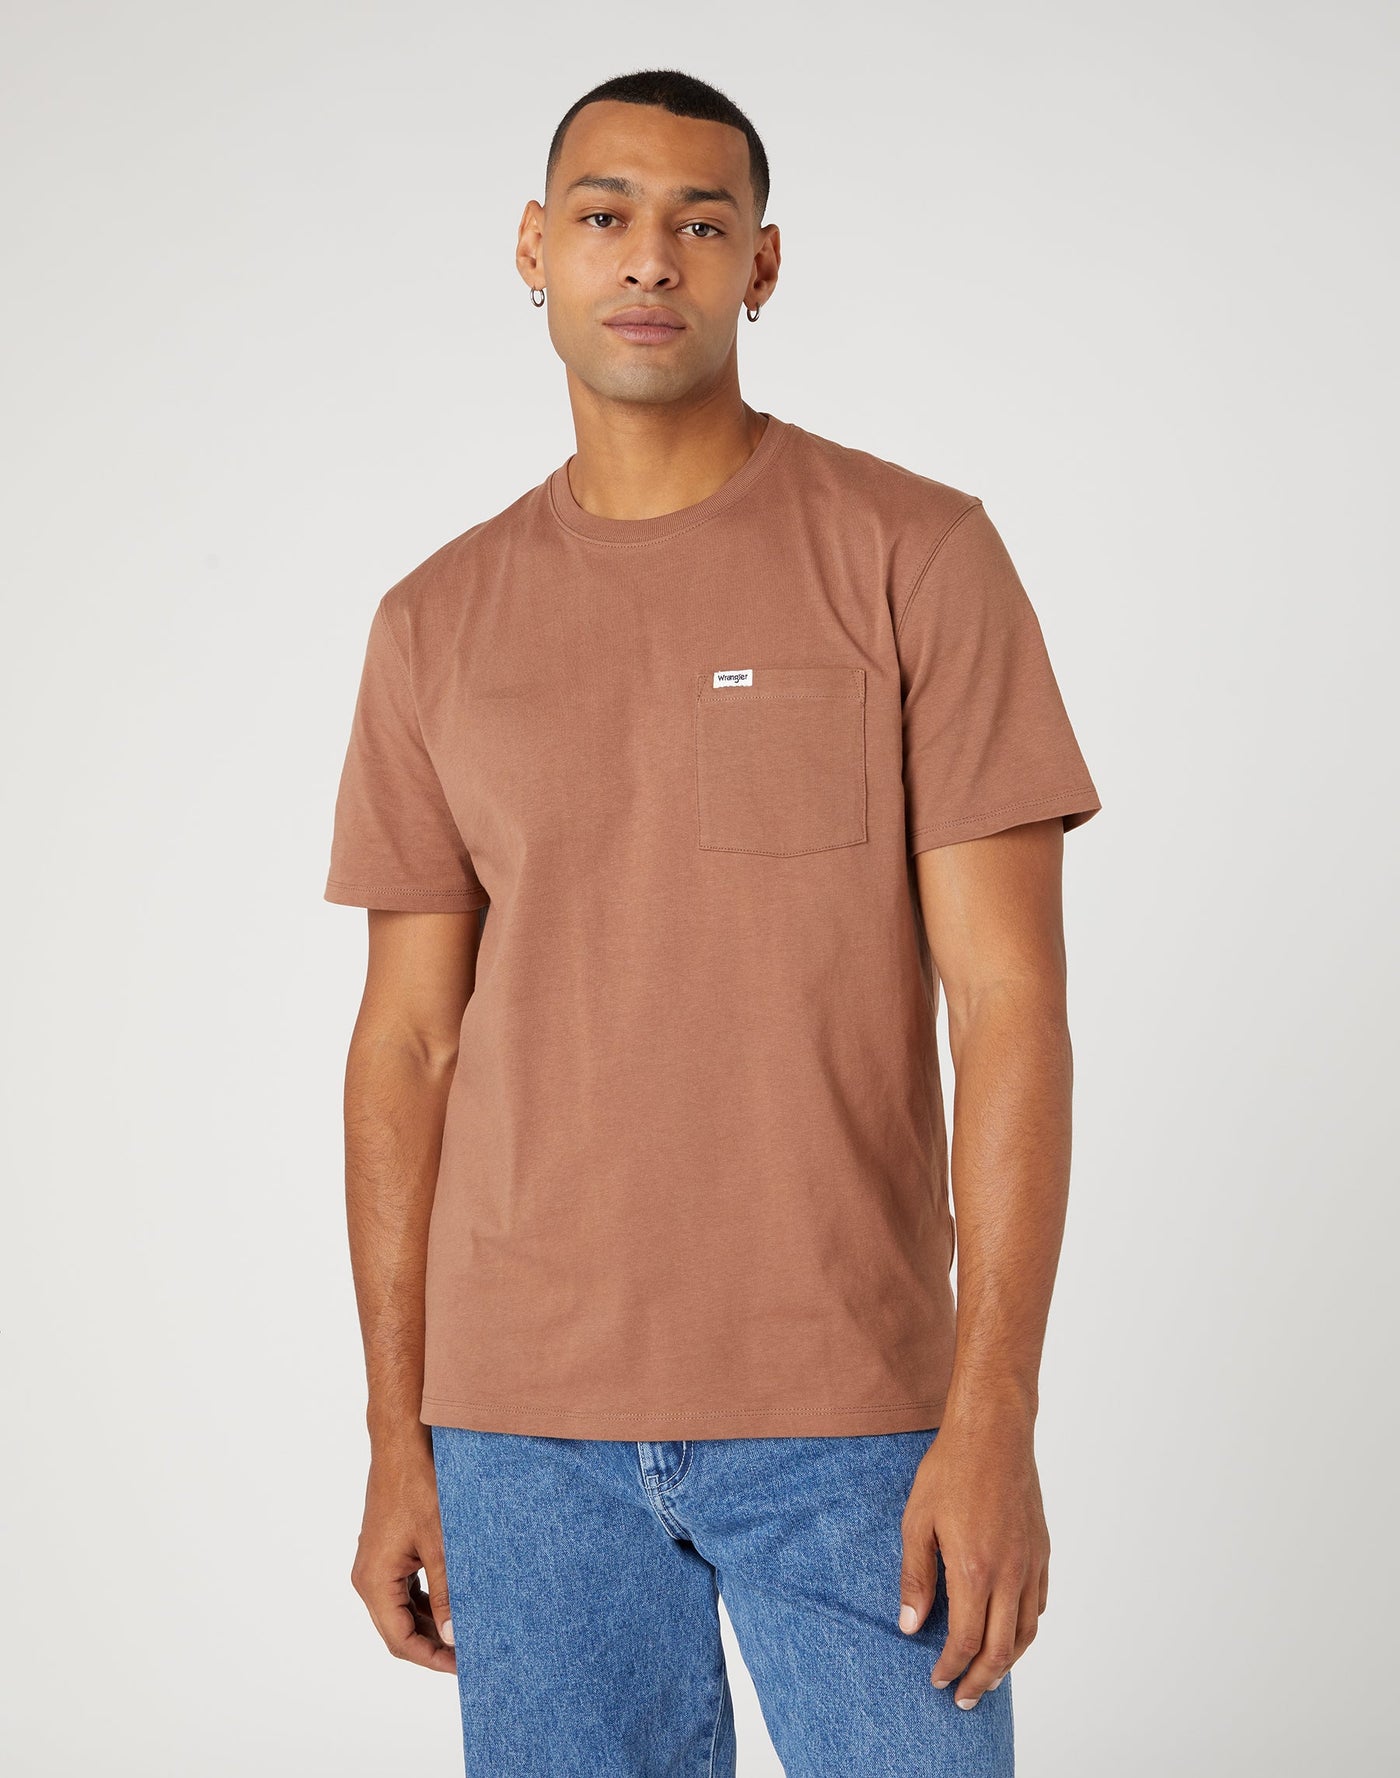 Pocket Tee in Cappuccino T-Shirts Wrangler   